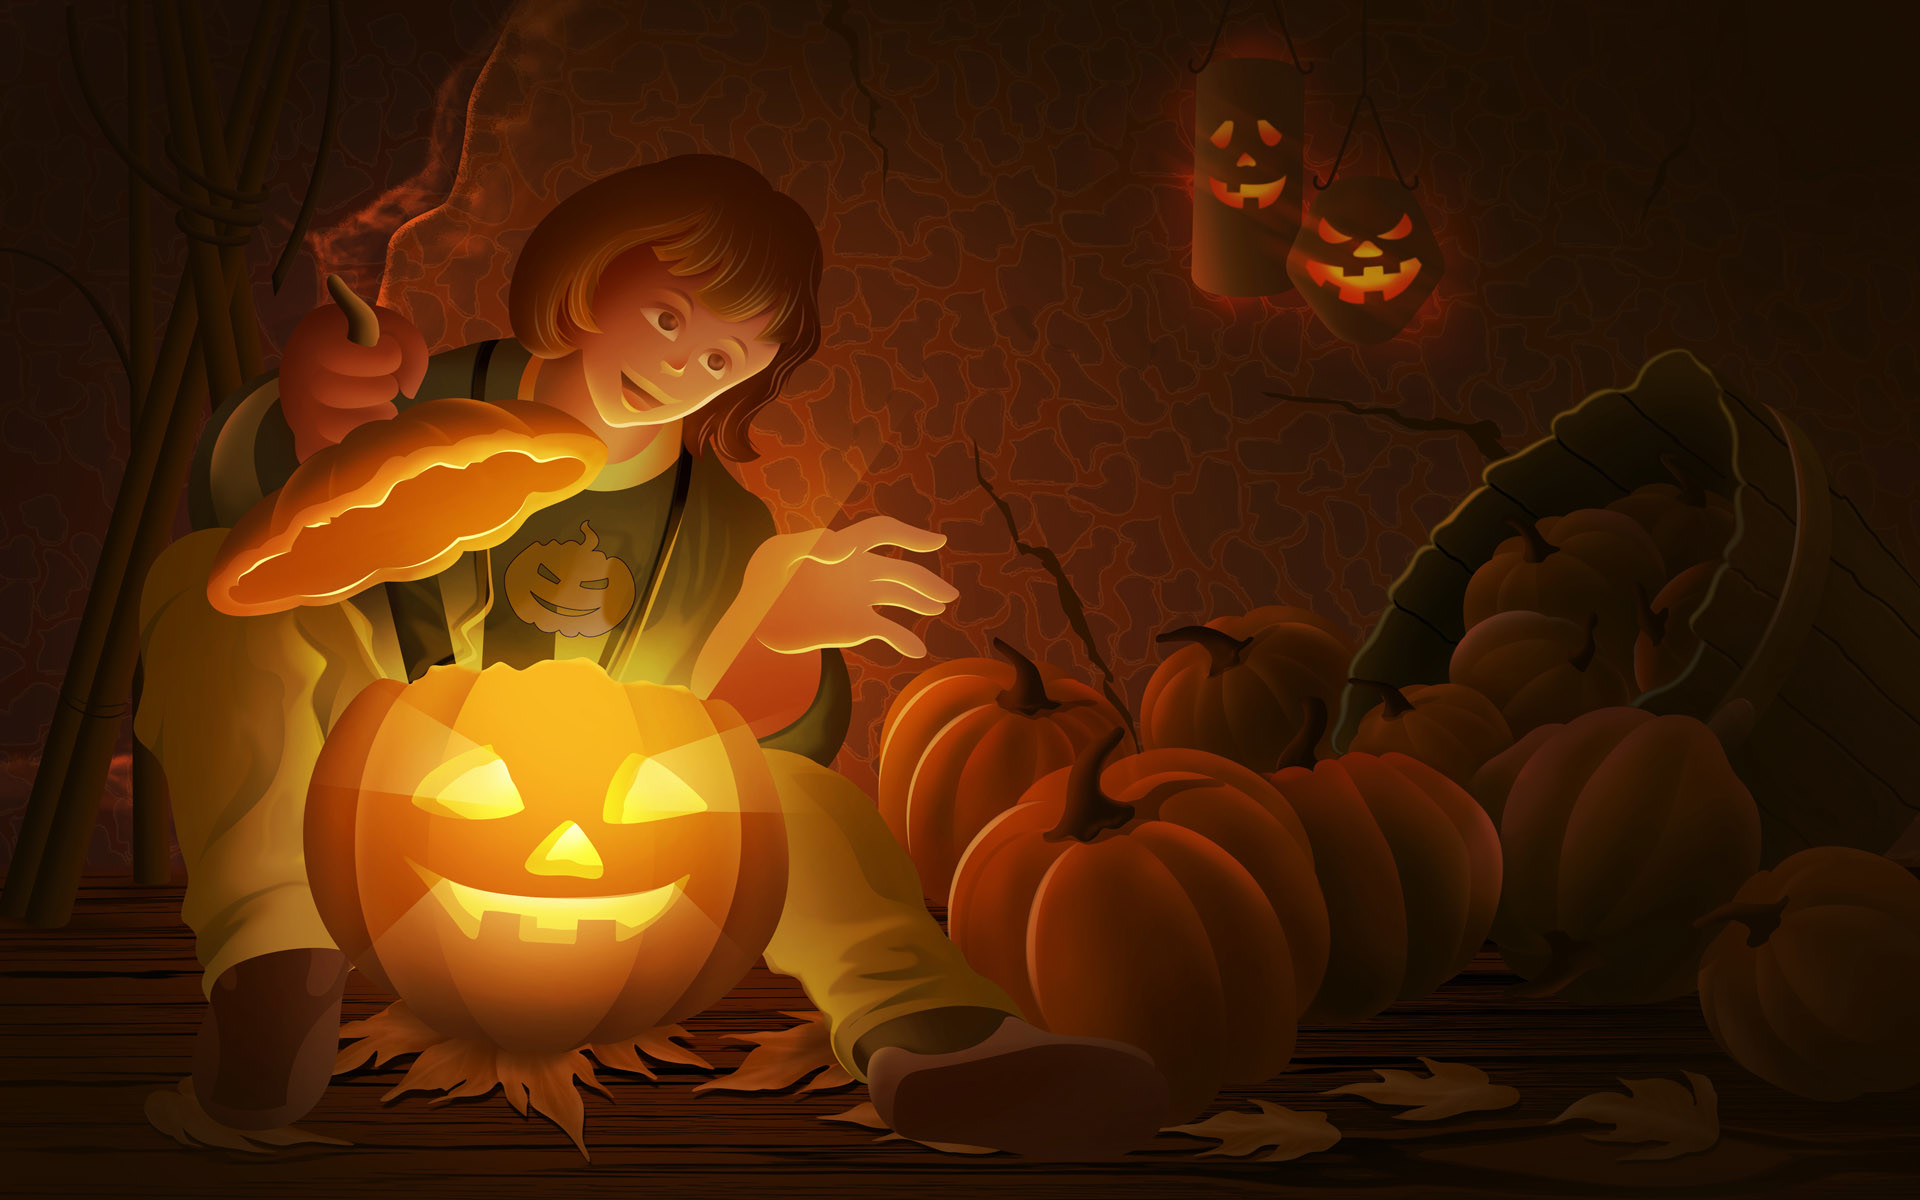 1920x1200 Pumpkin wallpapers and images - wallpapers, pictures, photos